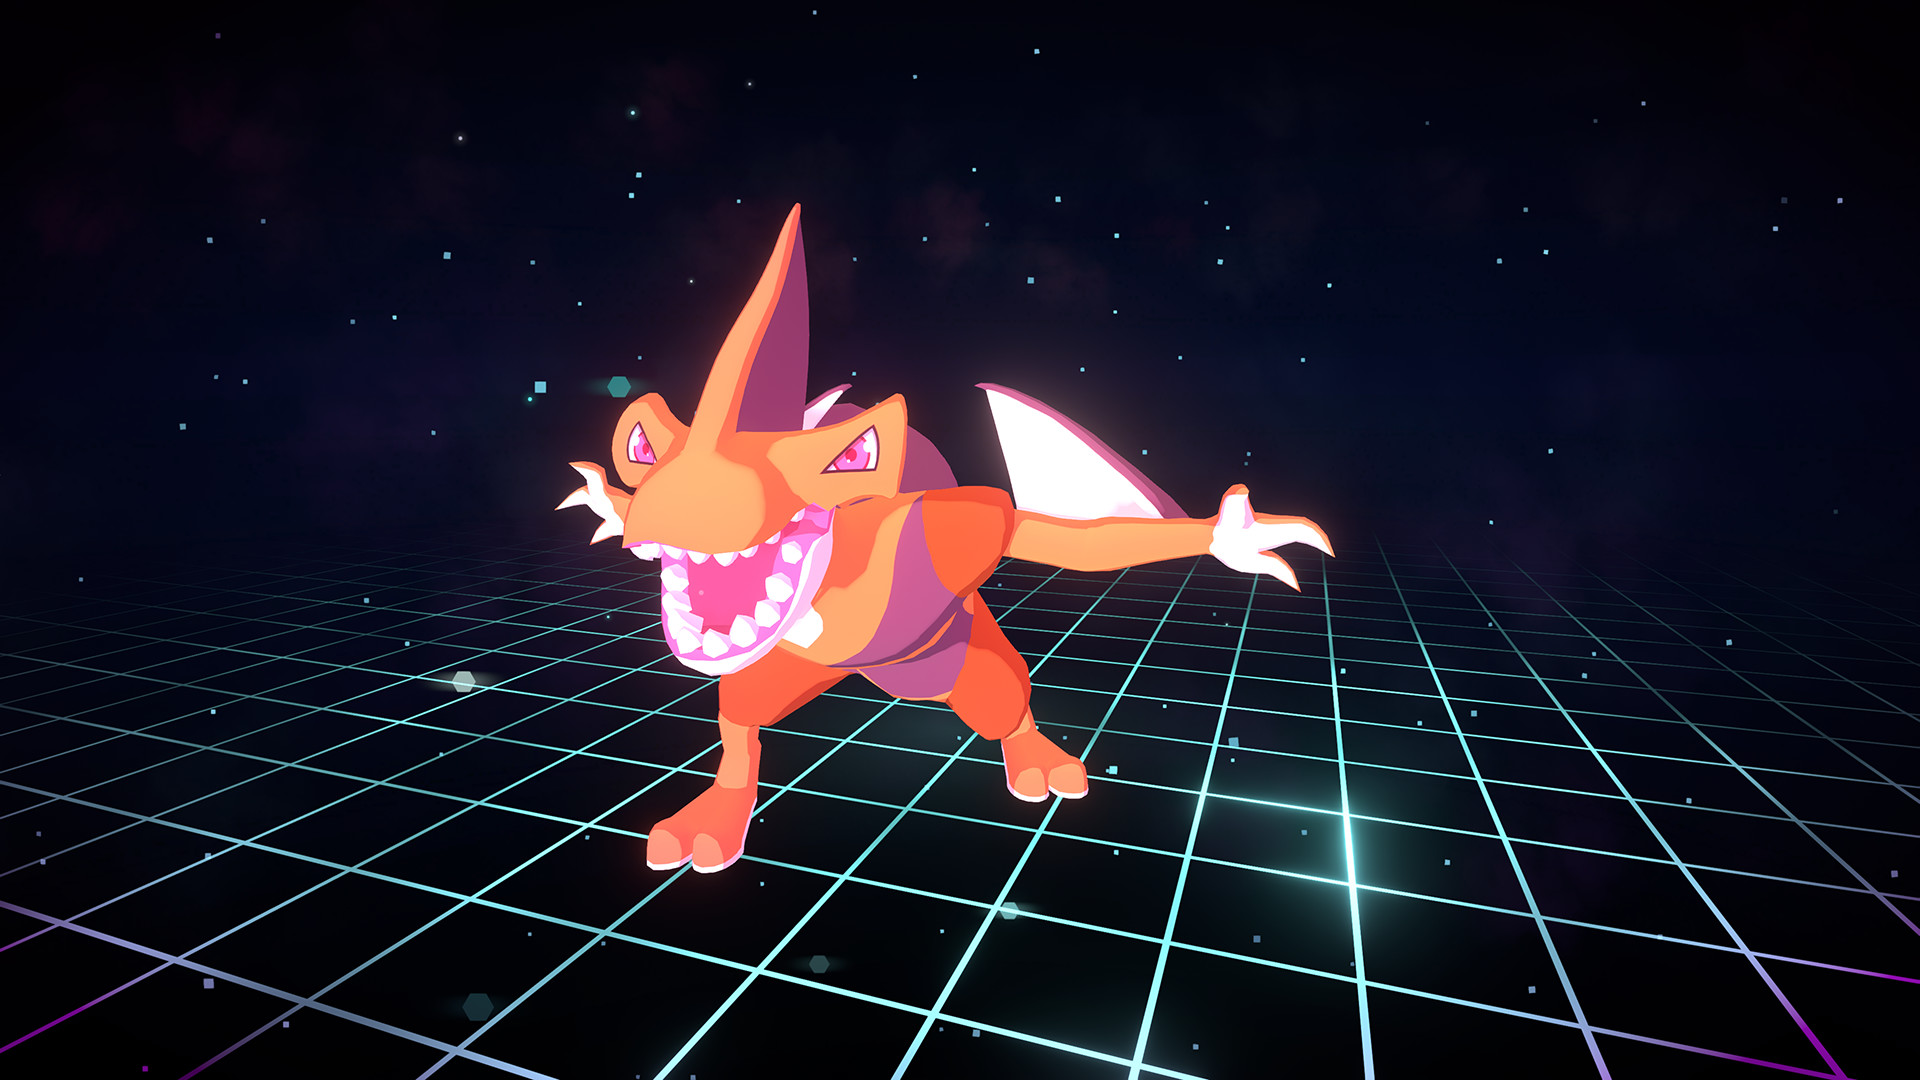 Ok so I fiddled with the 3d mod and : r/pokemmo